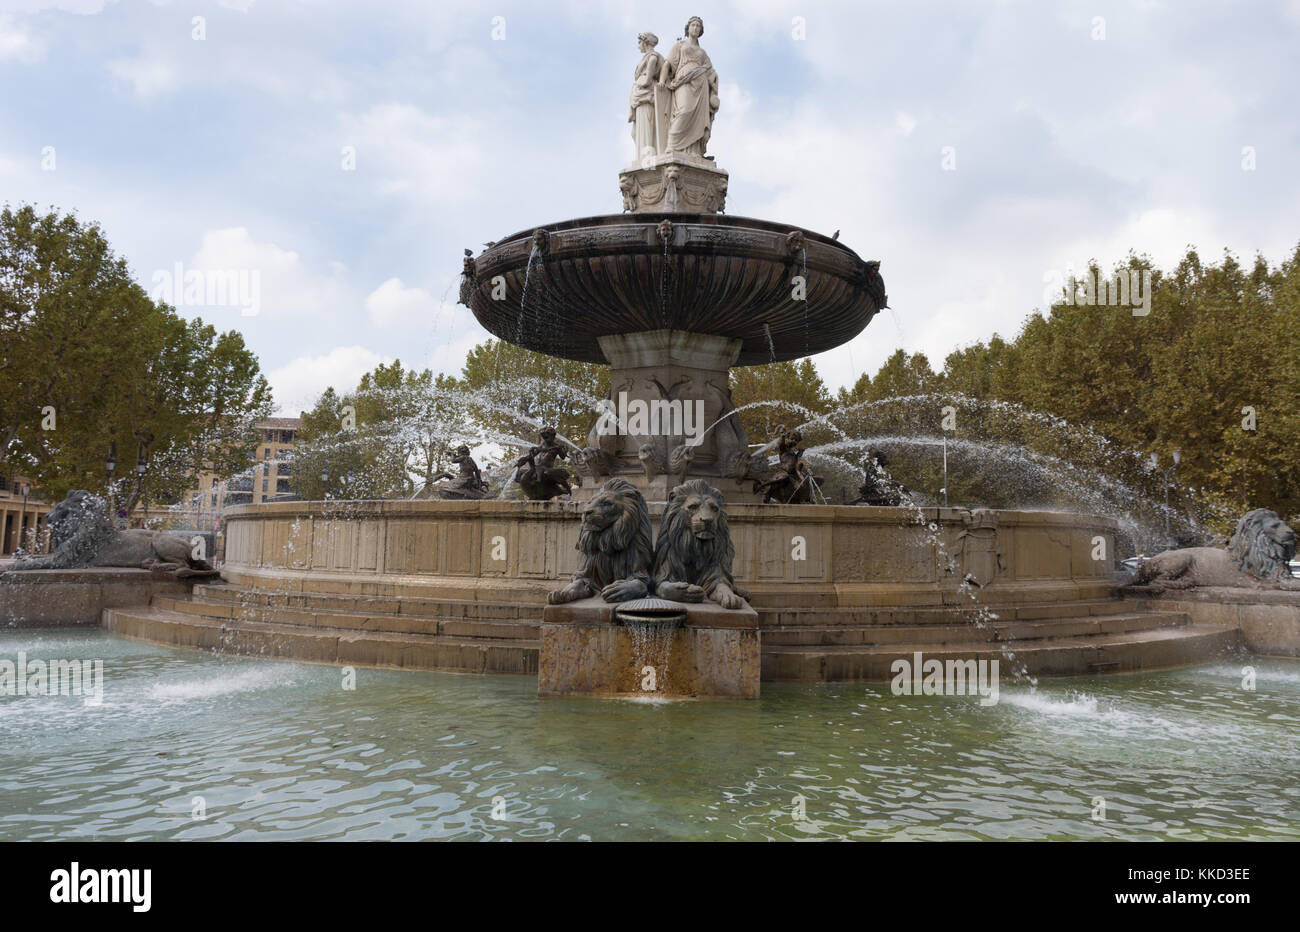 The Fountaine de la Rotonde in Aix in Provence, France. The statues of women represent Fine Arts, Agriculture and Justice. Trees are in the background Stock Photo